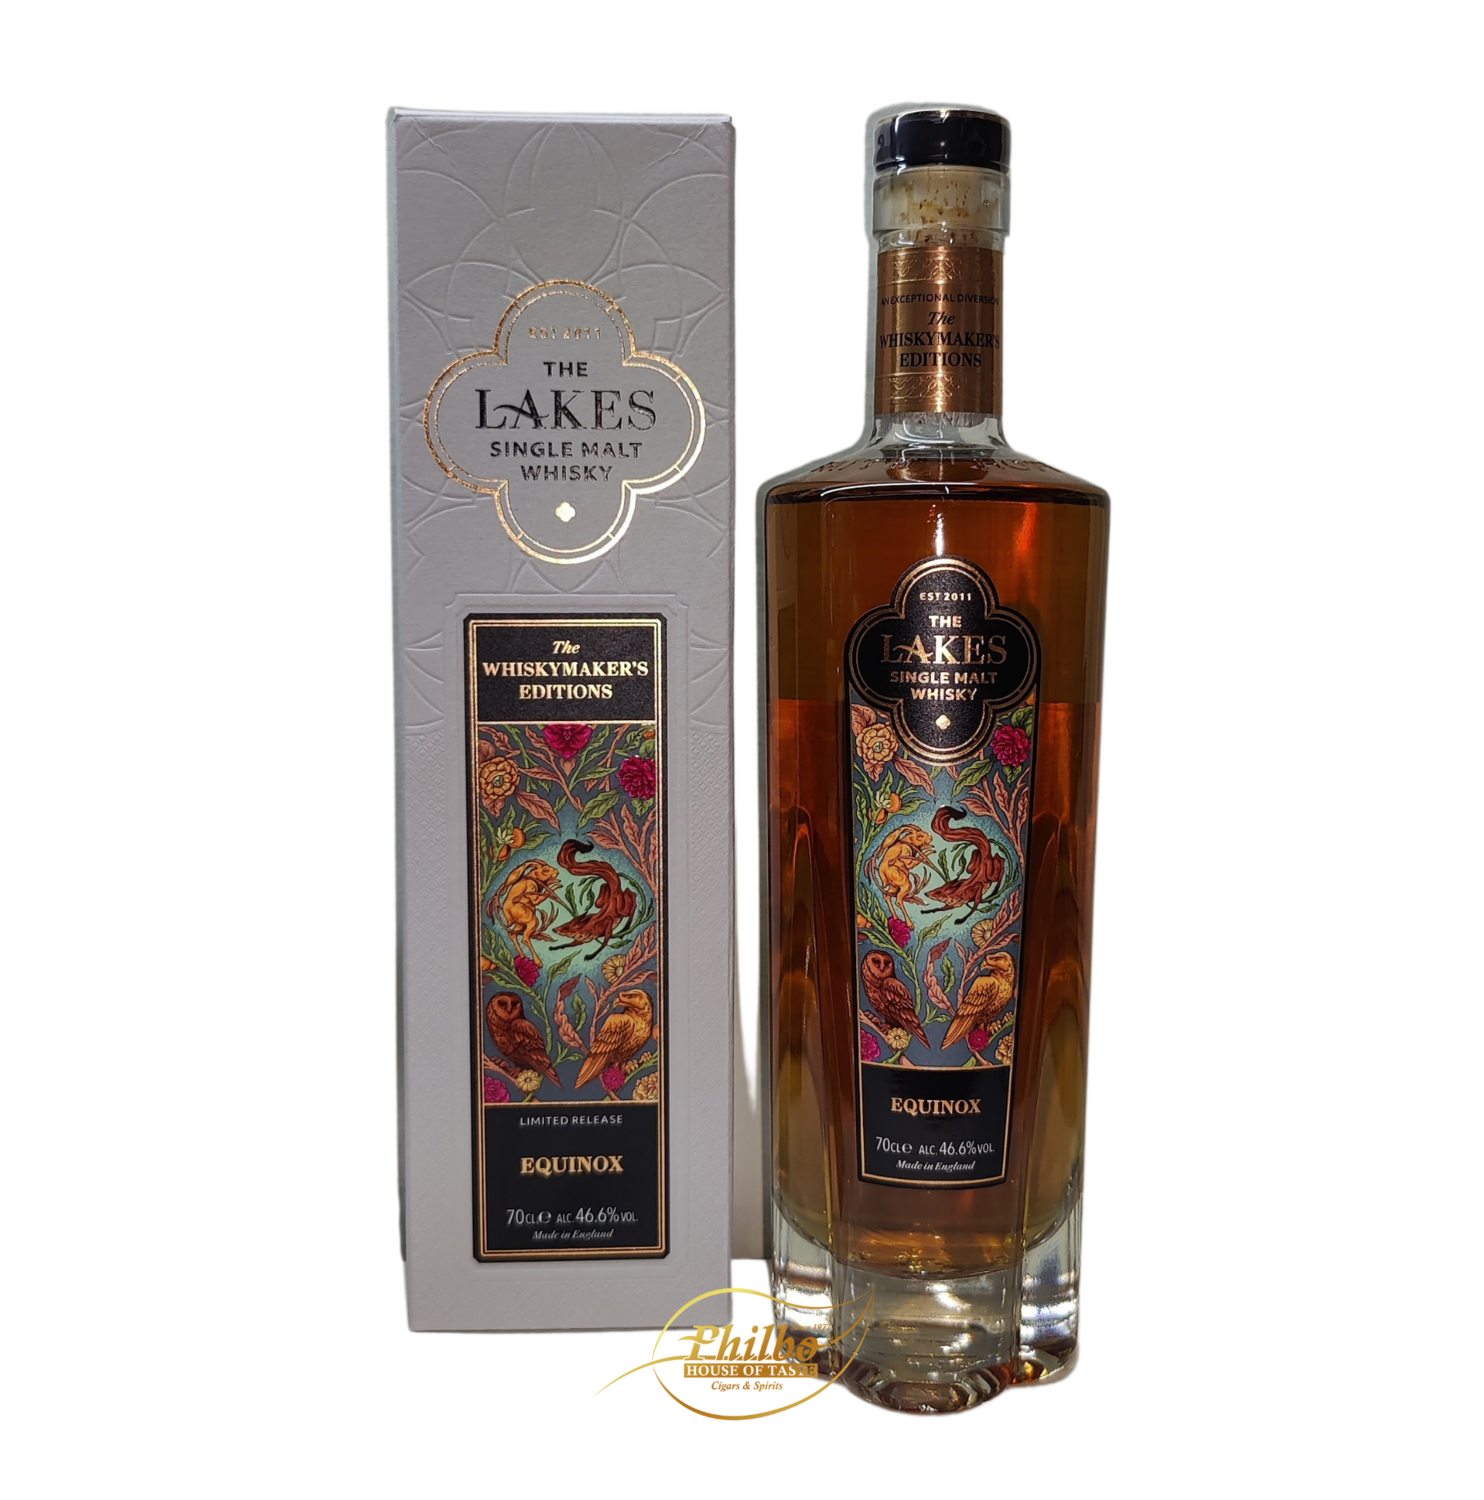 The Lakes Whiskymaker's Equinox 46,6% 0,7l